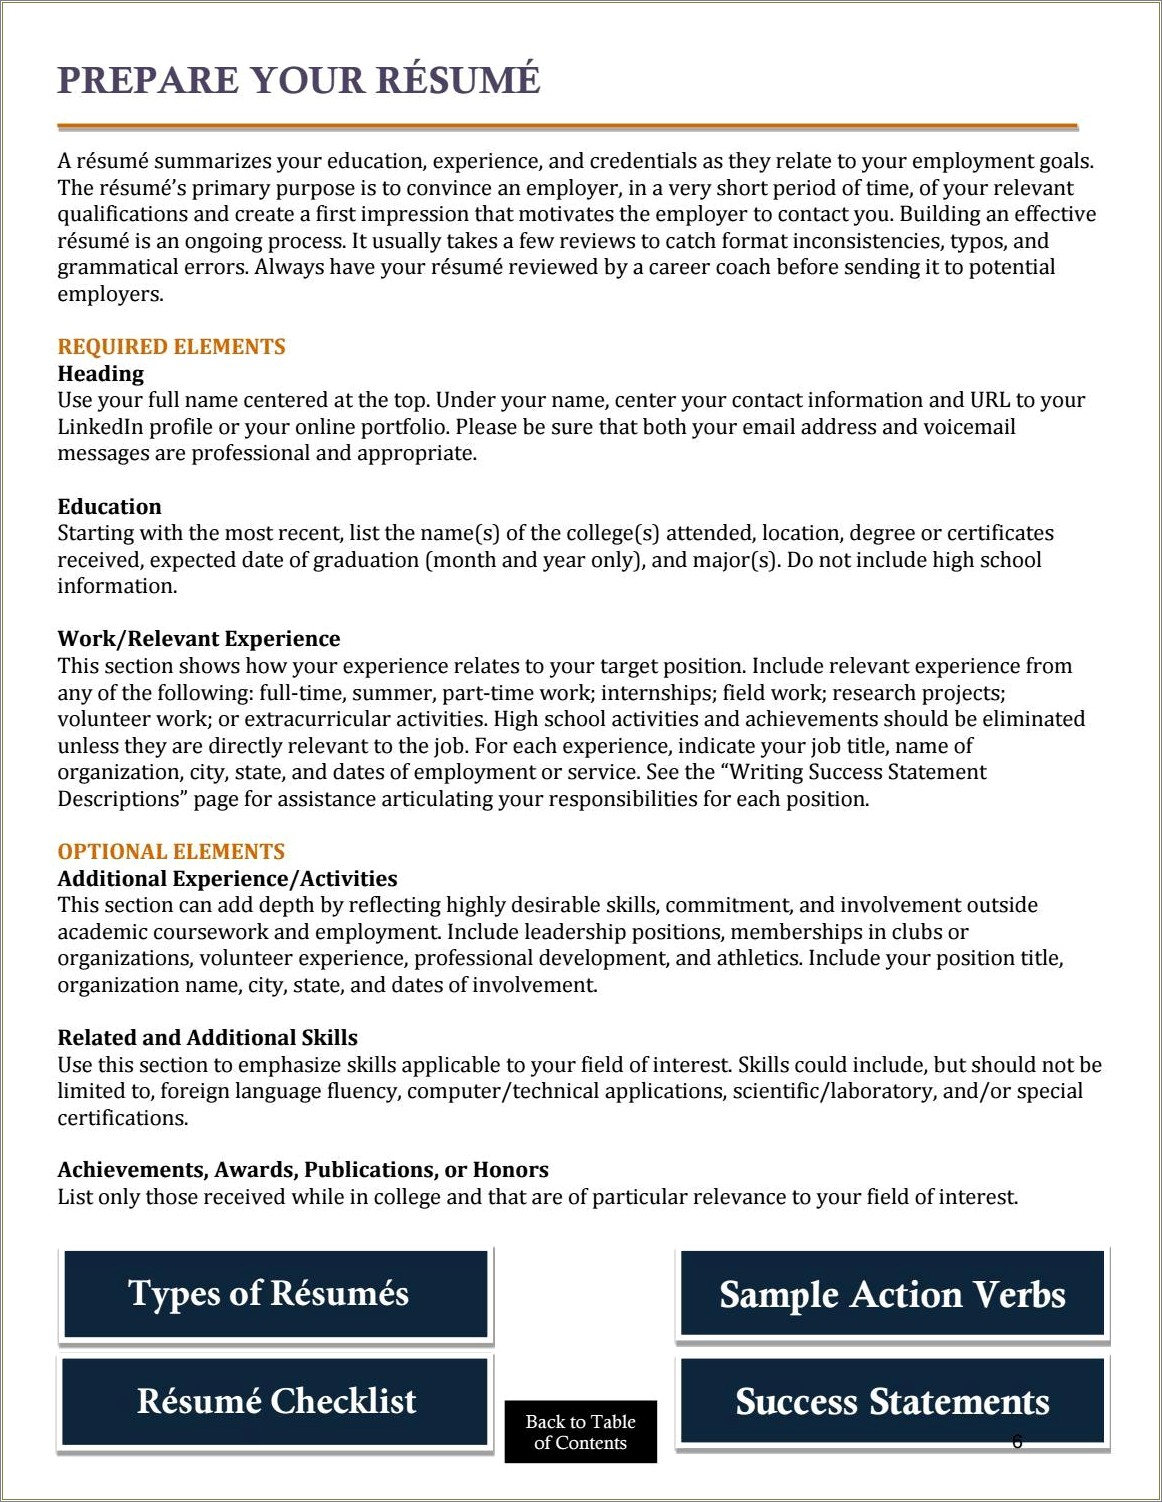 An Resume Groups Information By Skills And Accomplishments.